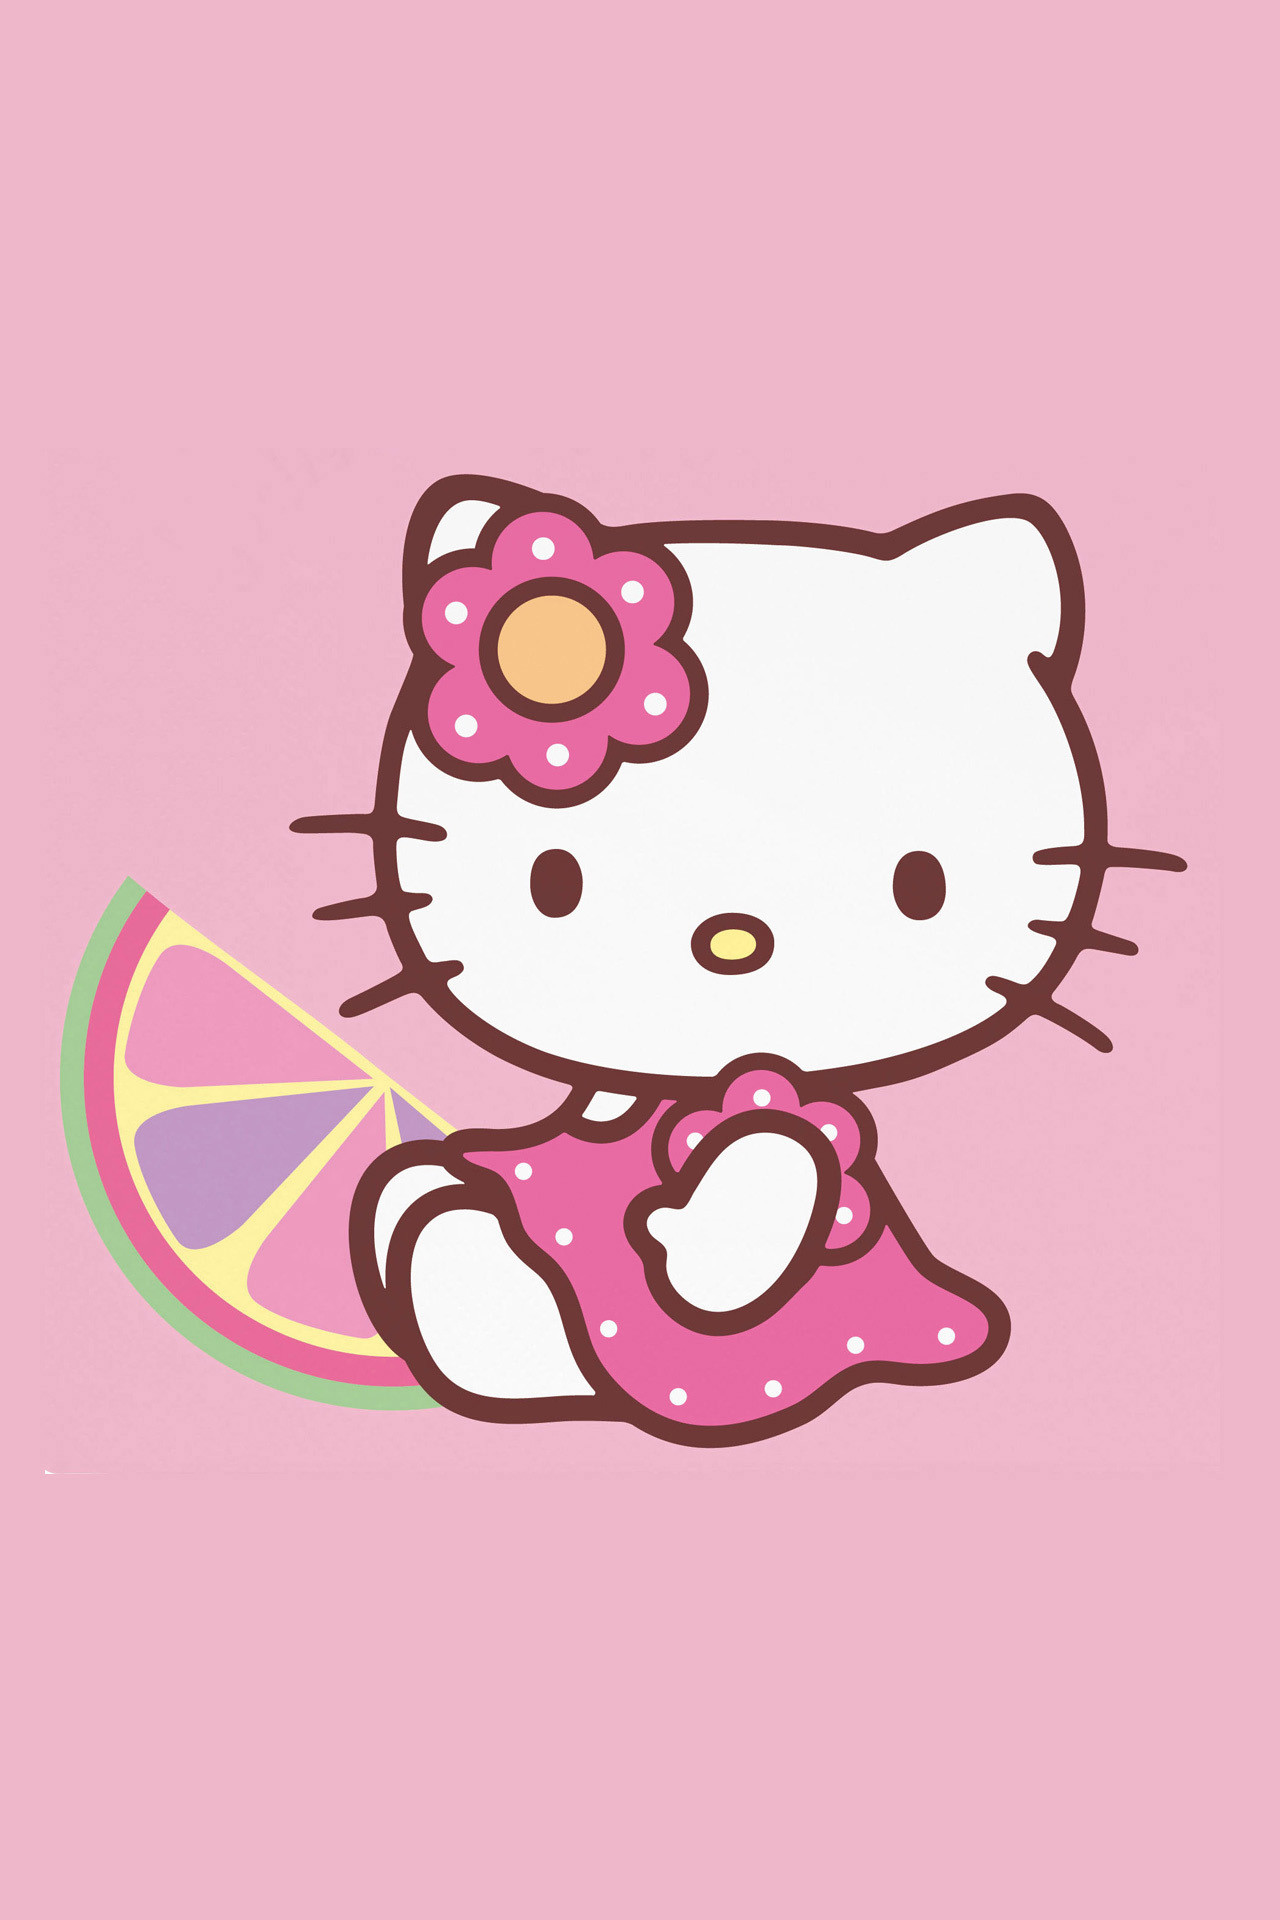 1280x1920 Cool and colorful Hello Kitty wallpapers to fit your iPhone iPhone iPhone  Galaxy and Galaxy Note